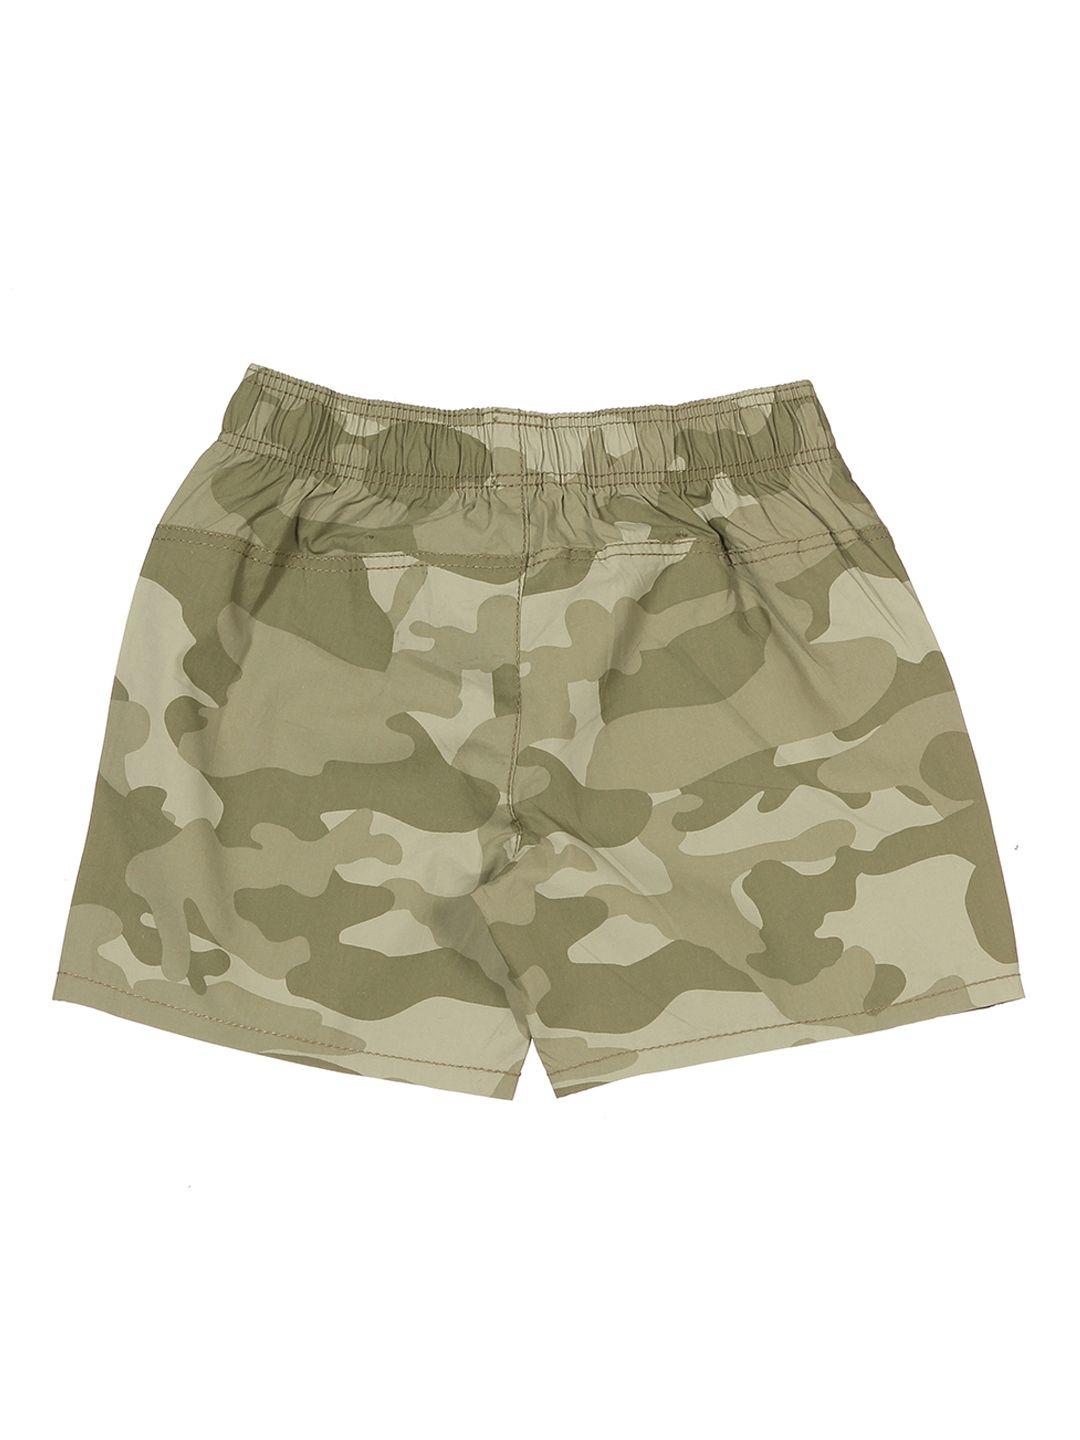 lil lollipop unisex kids green camouflage printed outdoor shorts